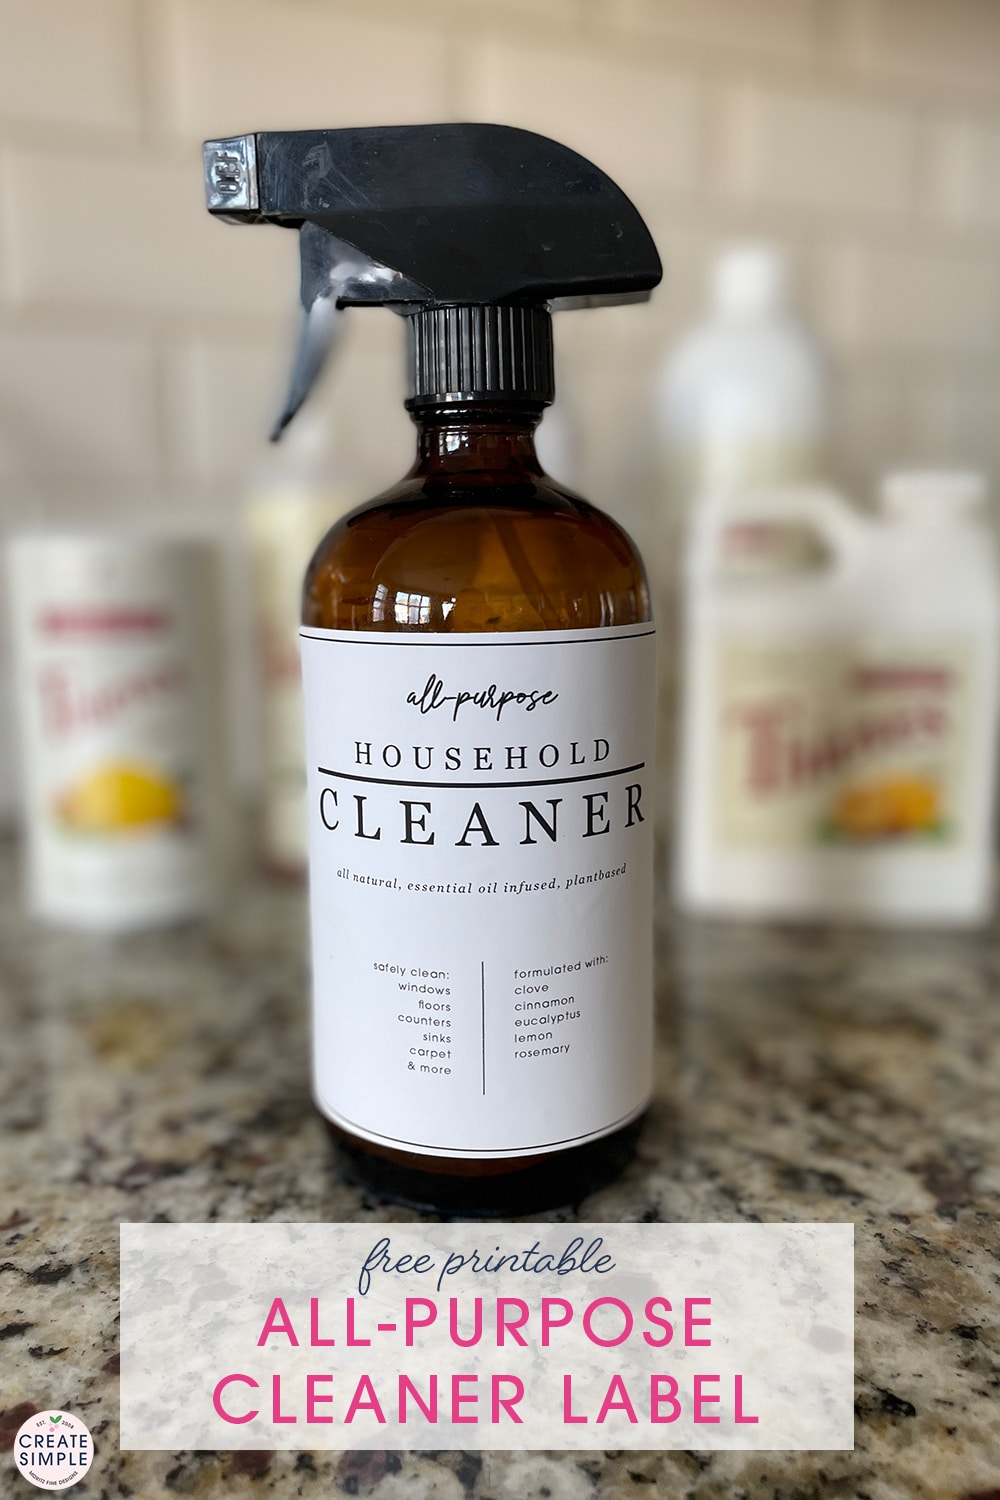 Ditch all your household cleaners and make the switch to this plant-based cleaner that you can use to clean everything in your home.